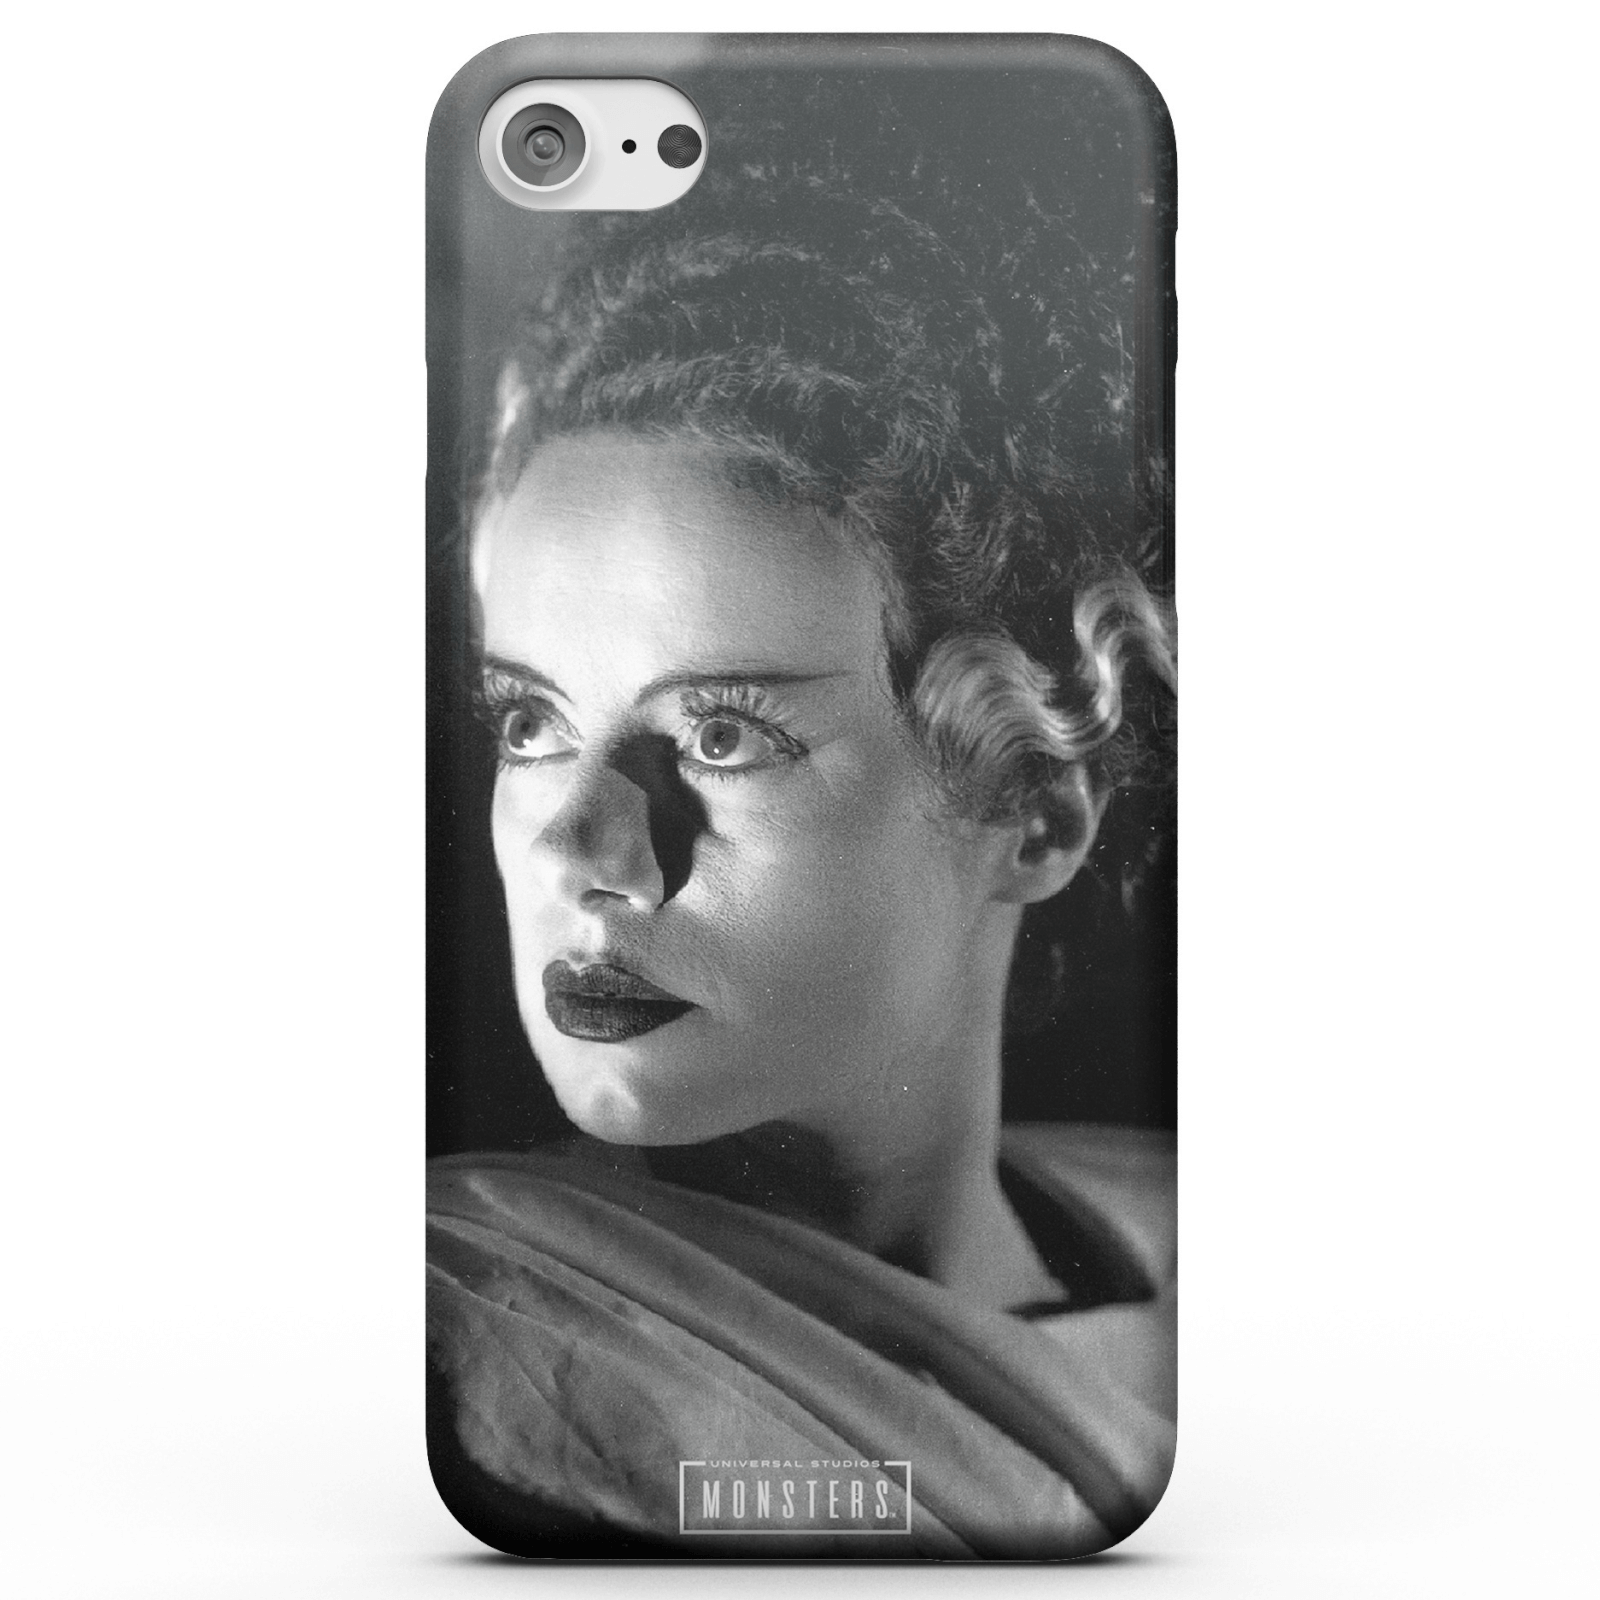 Photos - Other for Mobile Universal Monsters Bride Of Frankenstein Classic Phone Case for iPhone and 